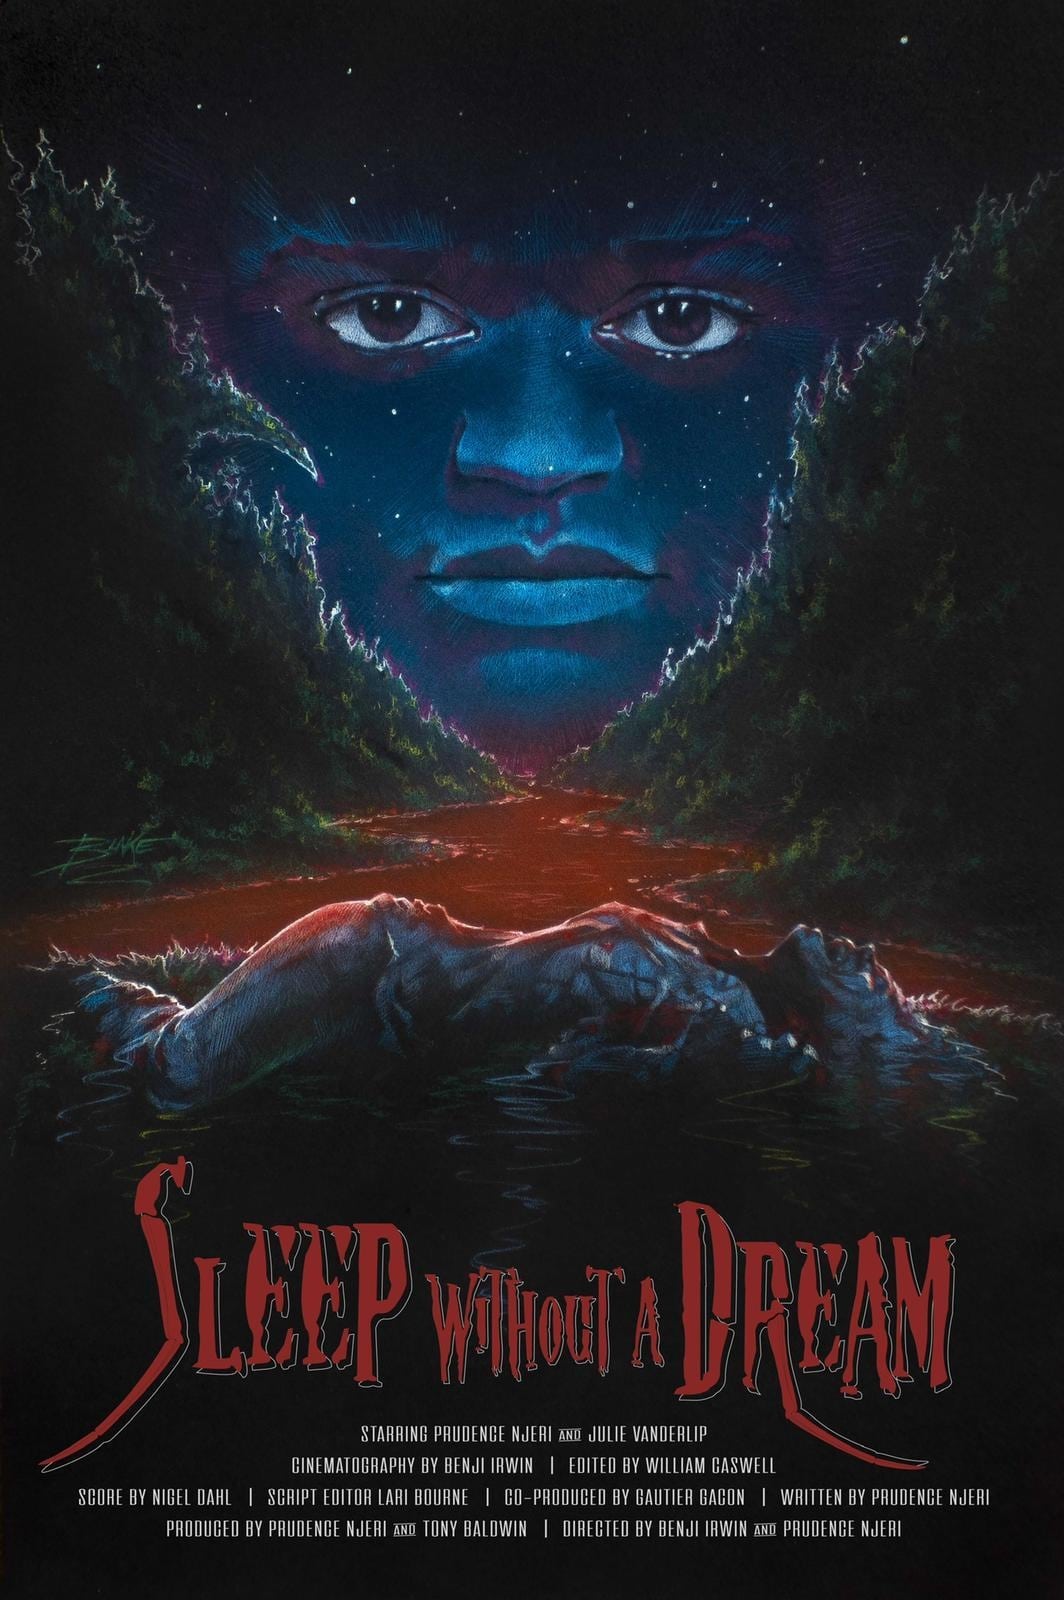 Sleep Without a Dream